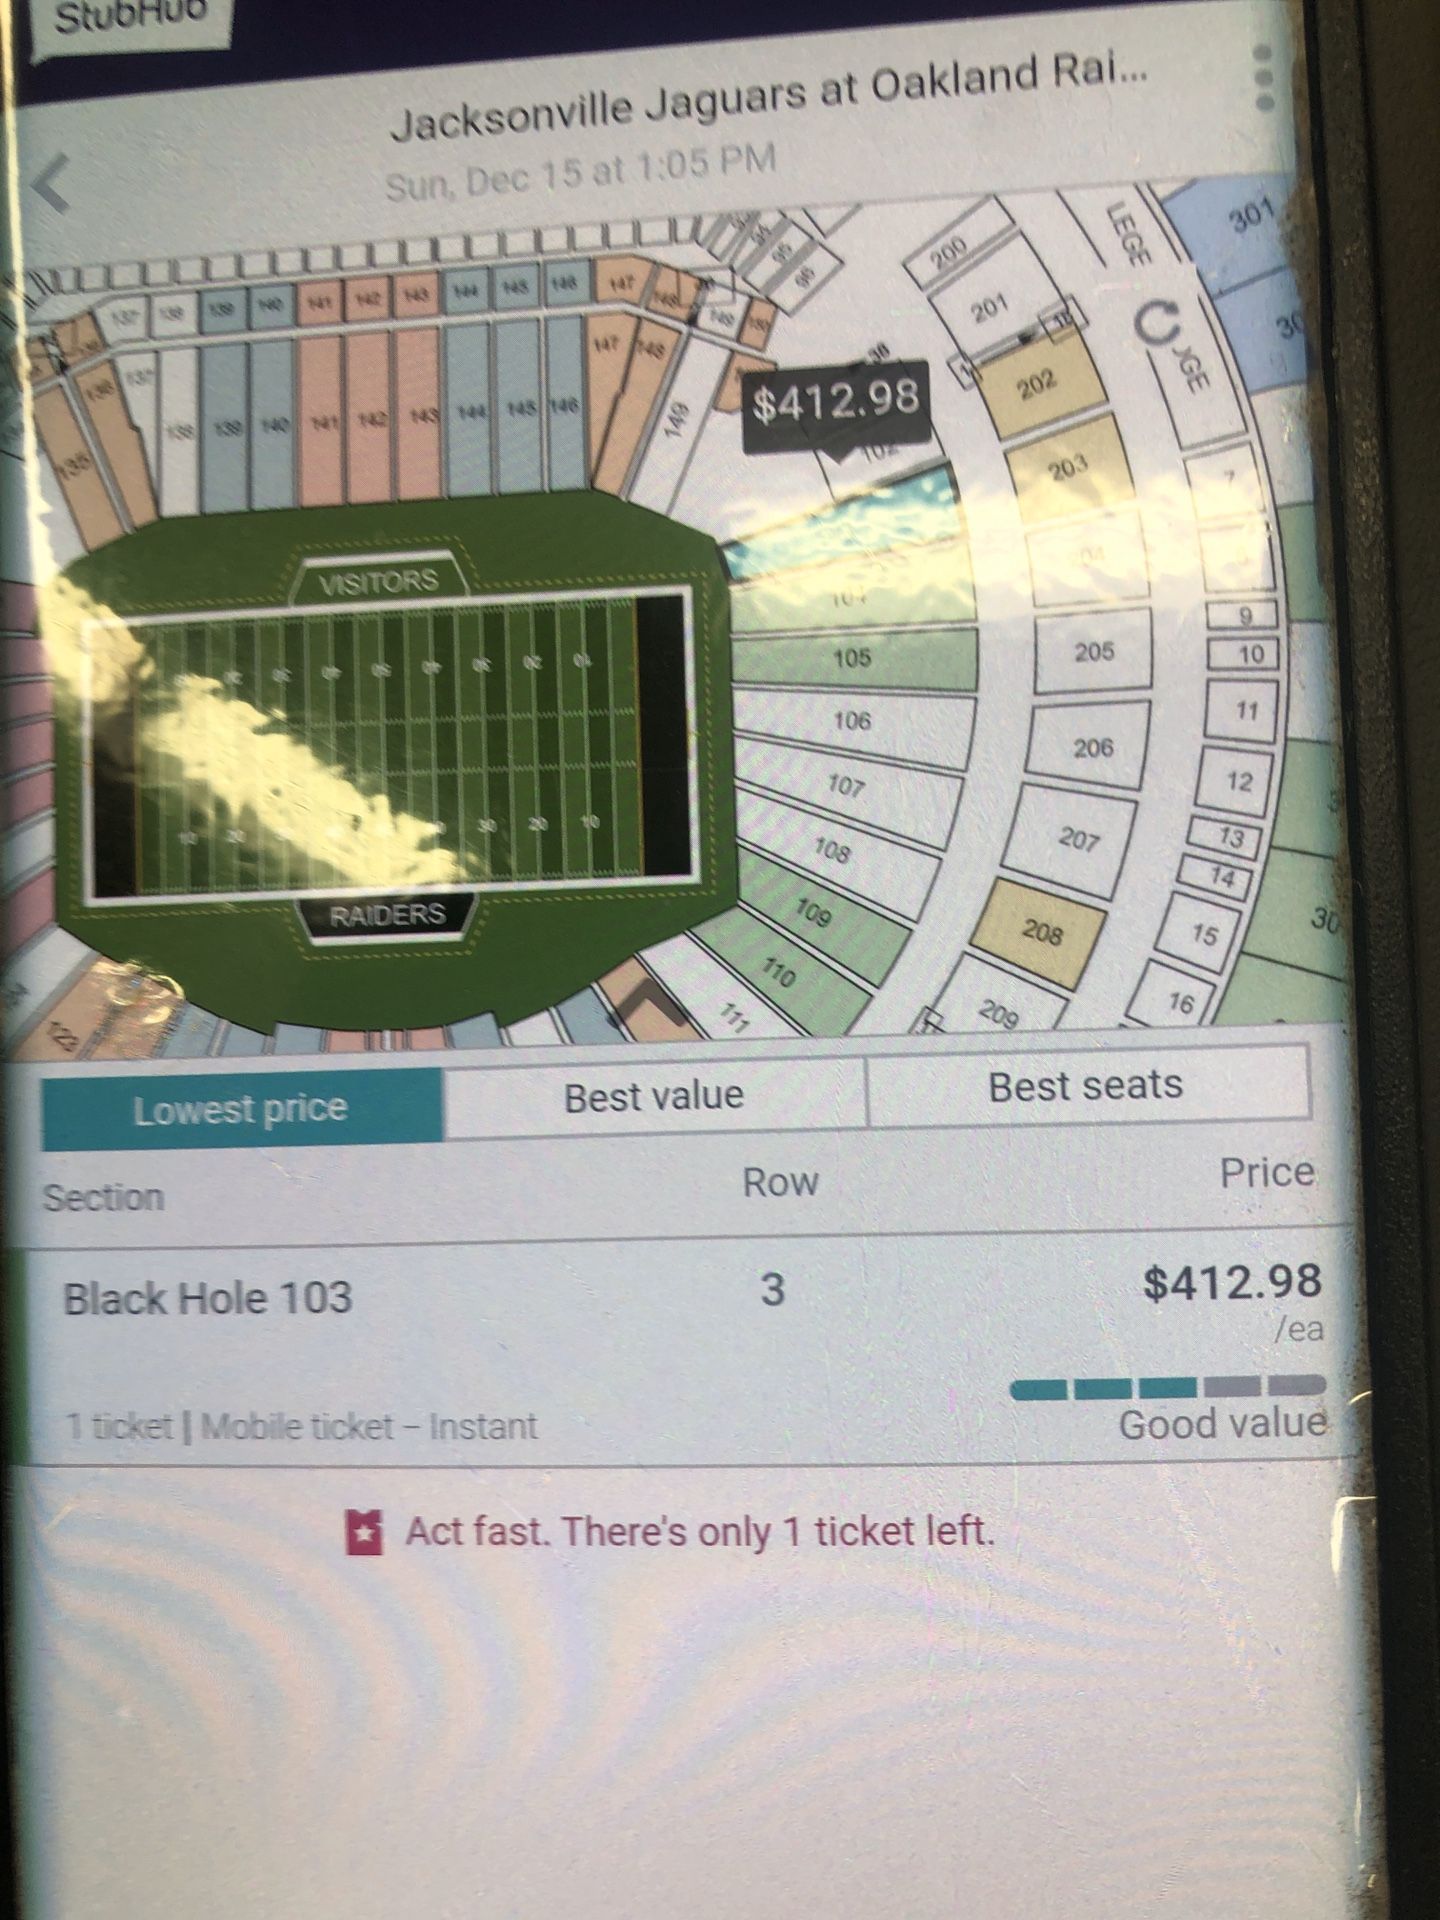 One extra ticket for the Raiders last game in the black hole. Section 103 Row 23